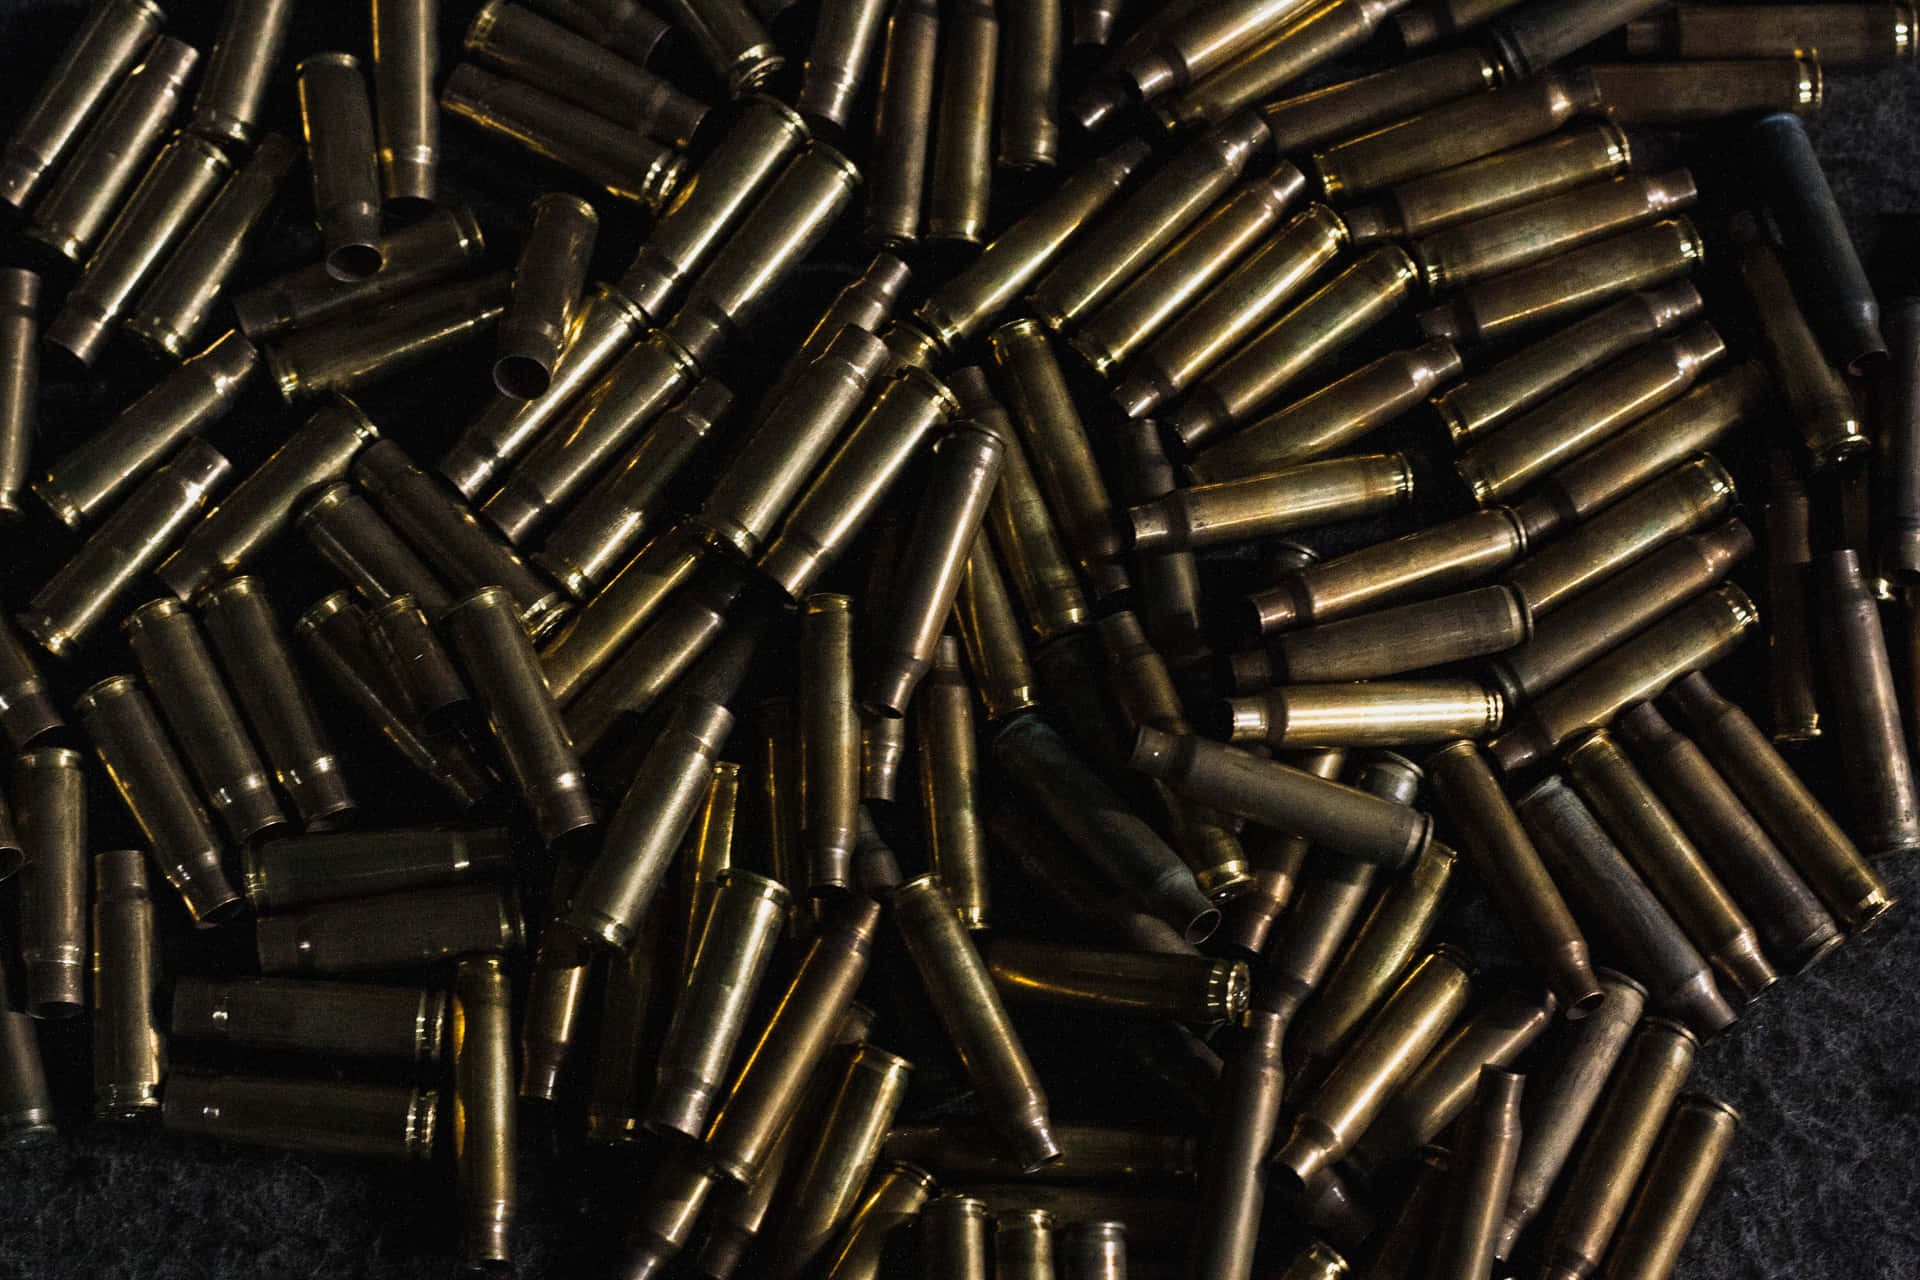 A Pile Of Bullets On A Black Surface